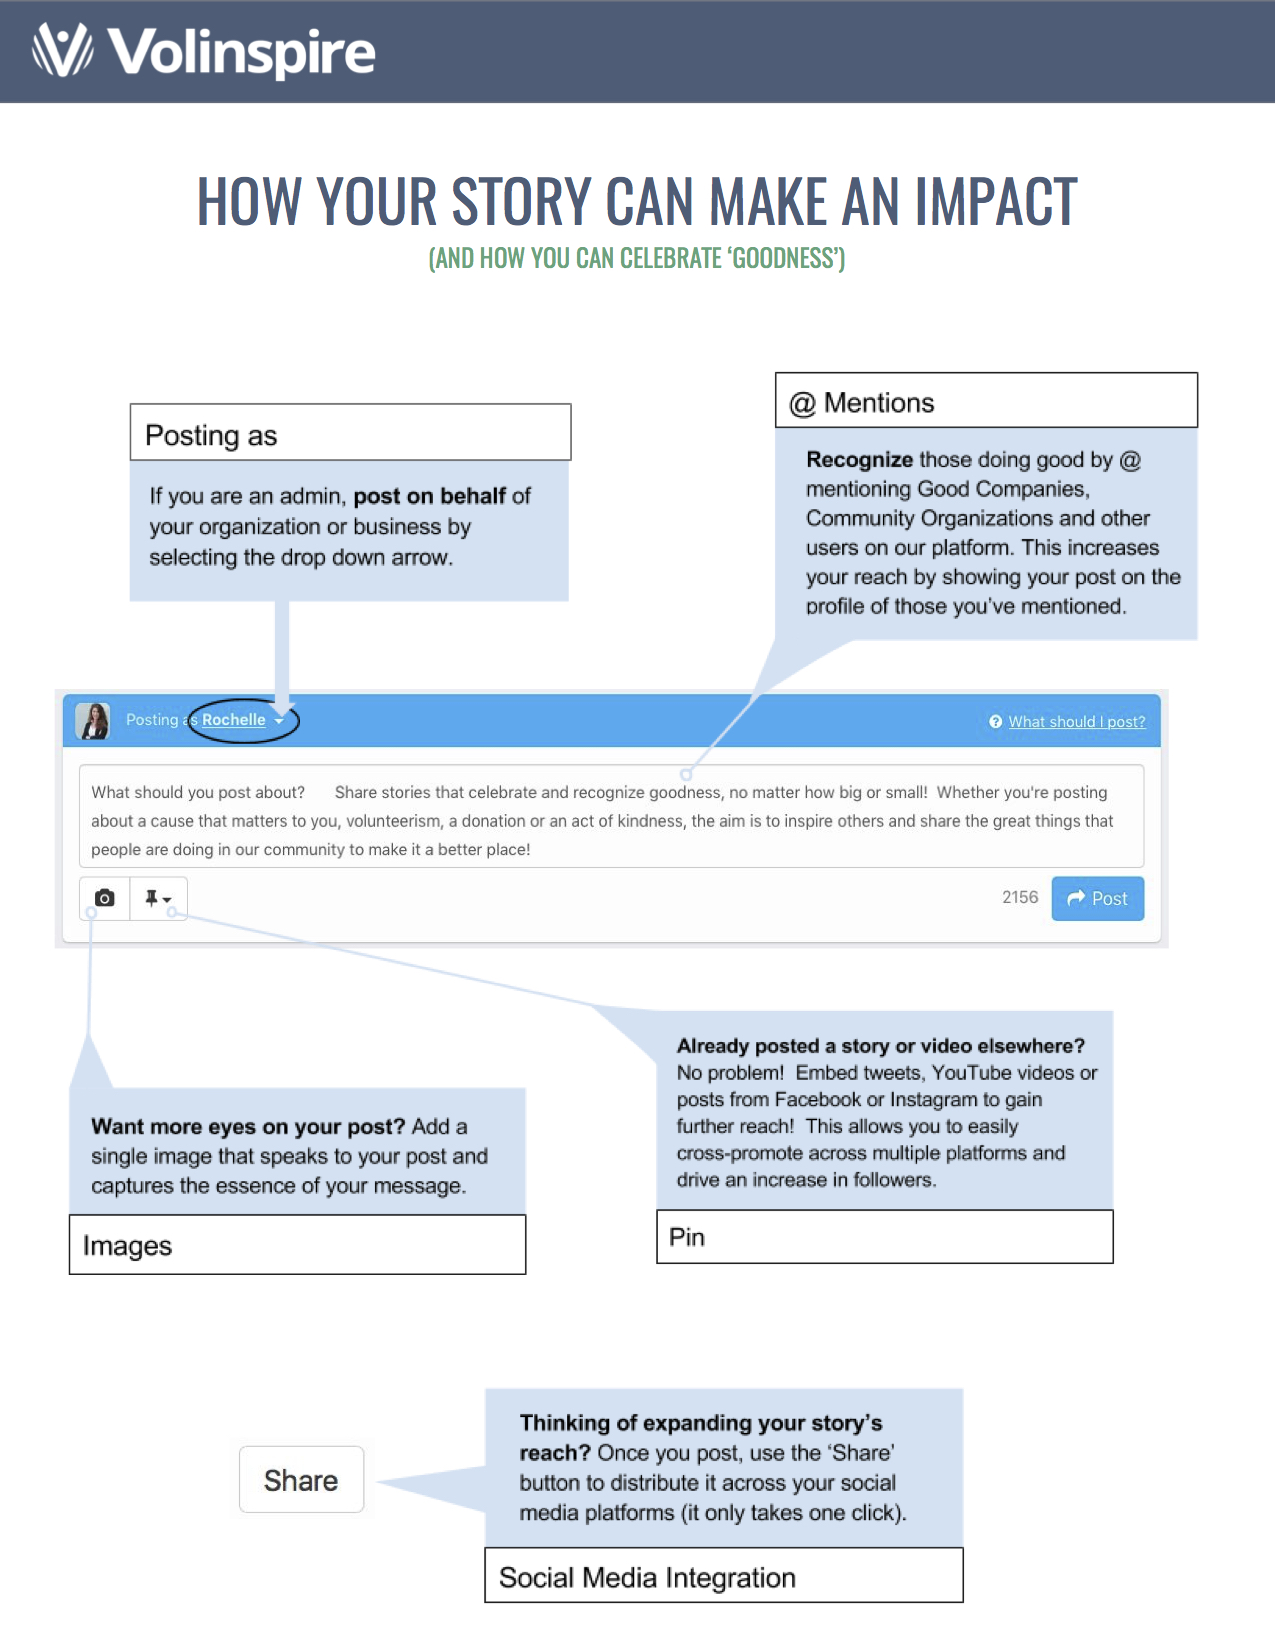 How_Your_Story_can_Make_an_Impact.jpg